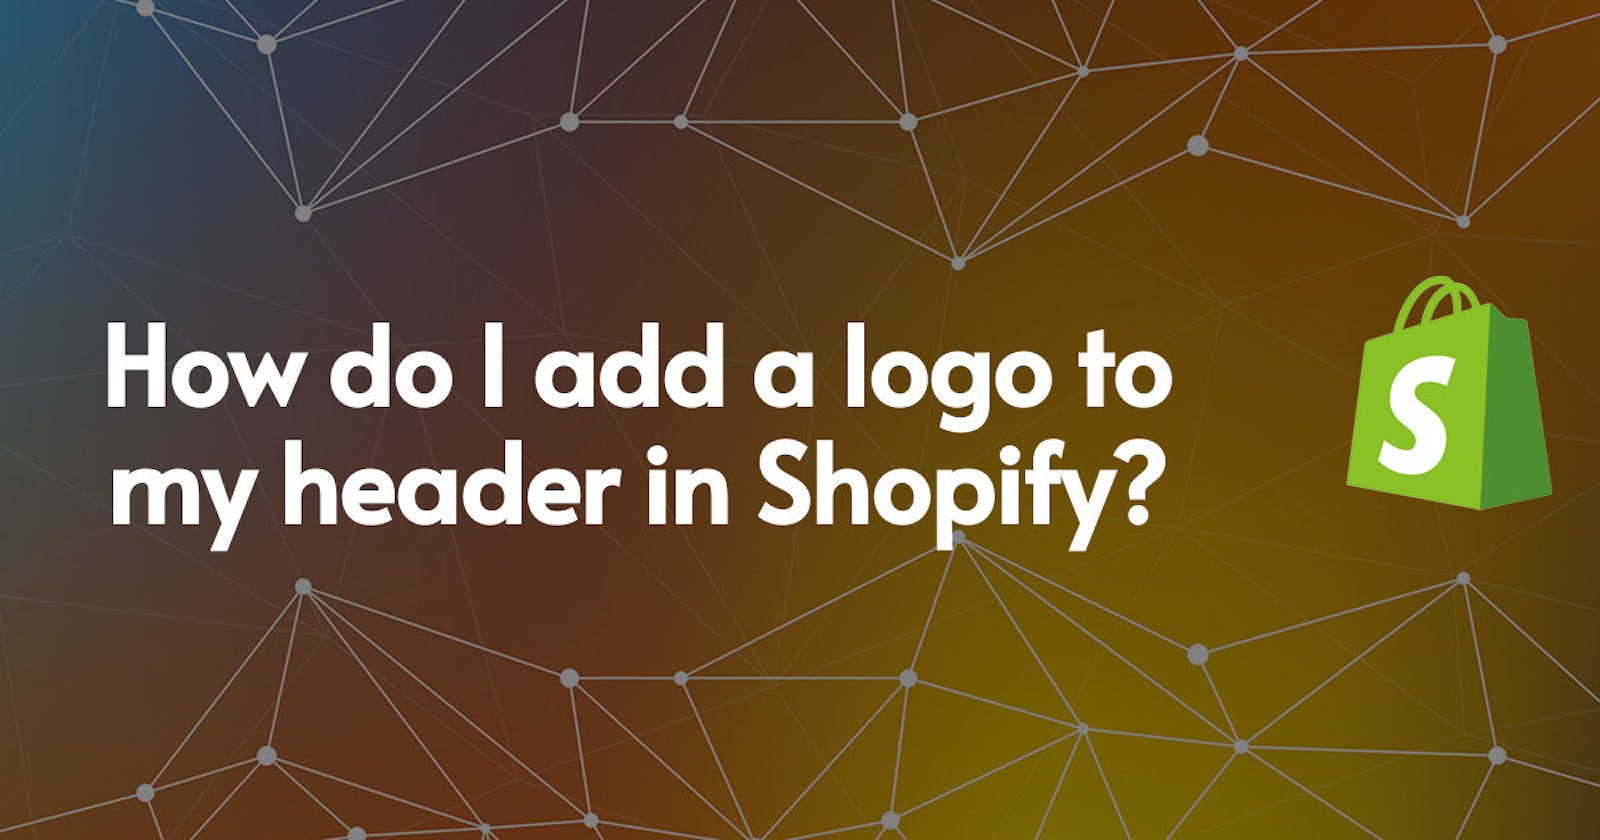 How do I add a logo to my header in Shopify?